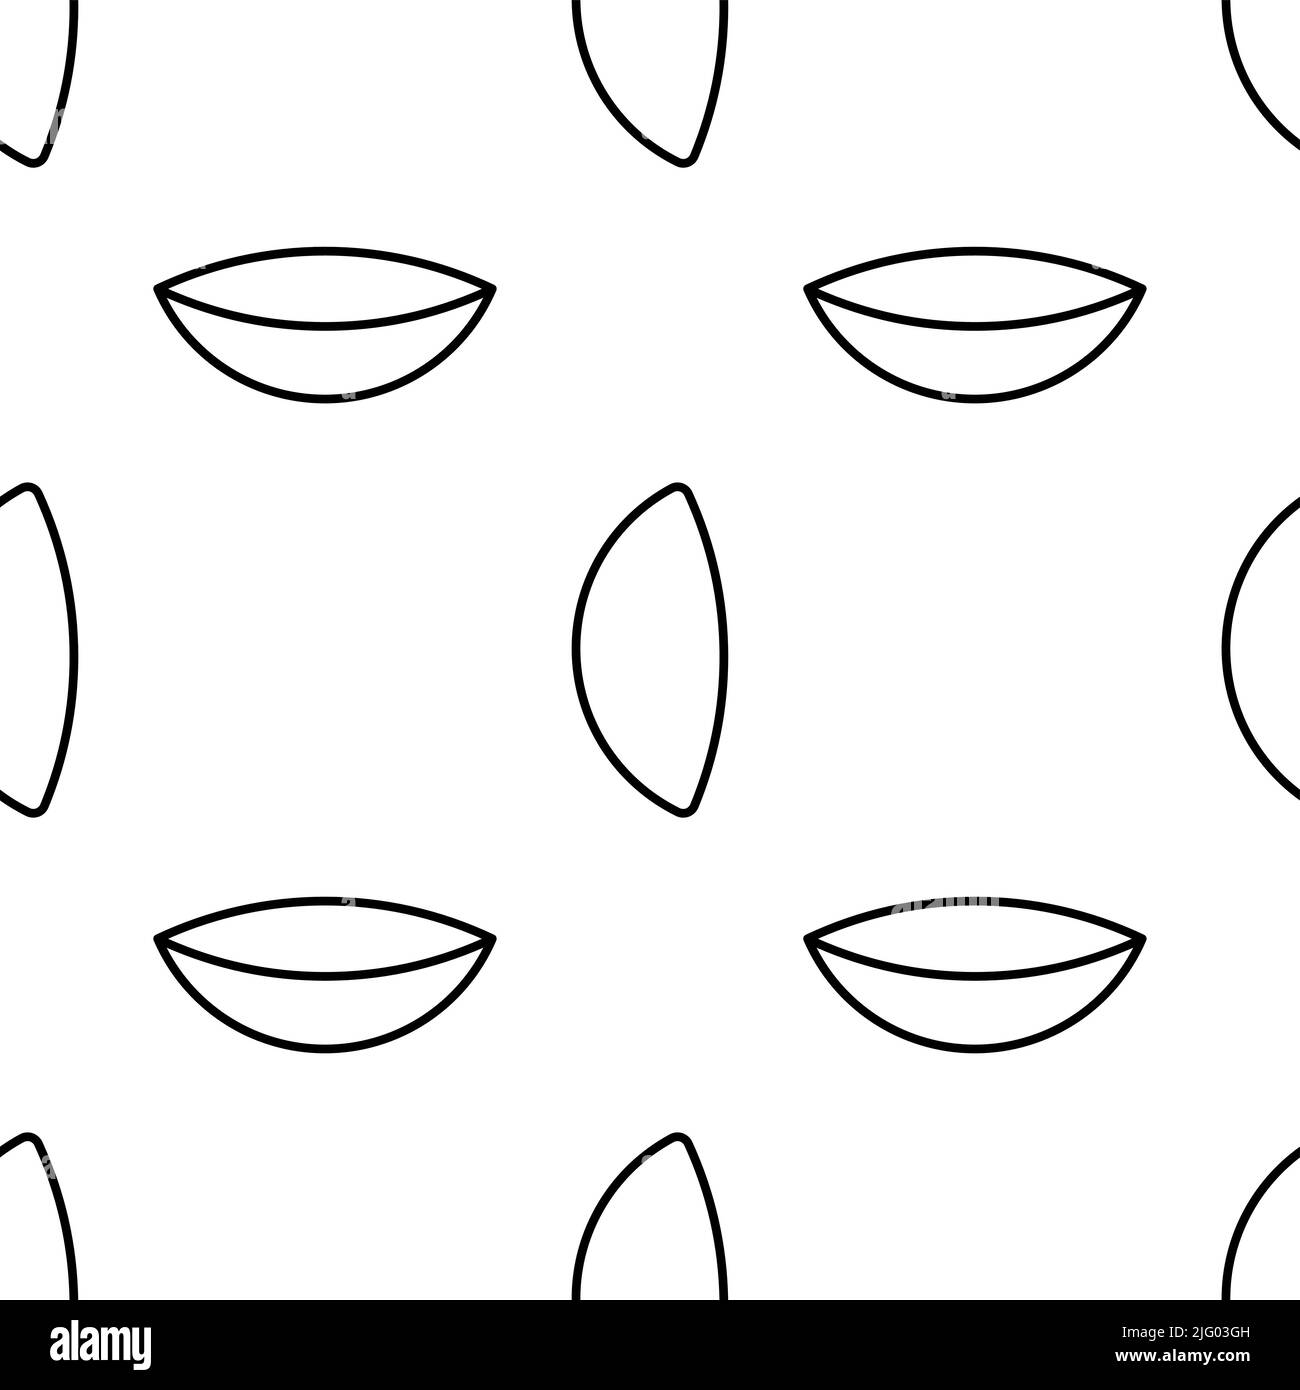 Contact Lens Icon Seamless Pattern, Ocular Prosthetic Device Vision Improvement Decoration Thin Lens Placed Directly On The Surface Of The Eye Vector Stock Vector